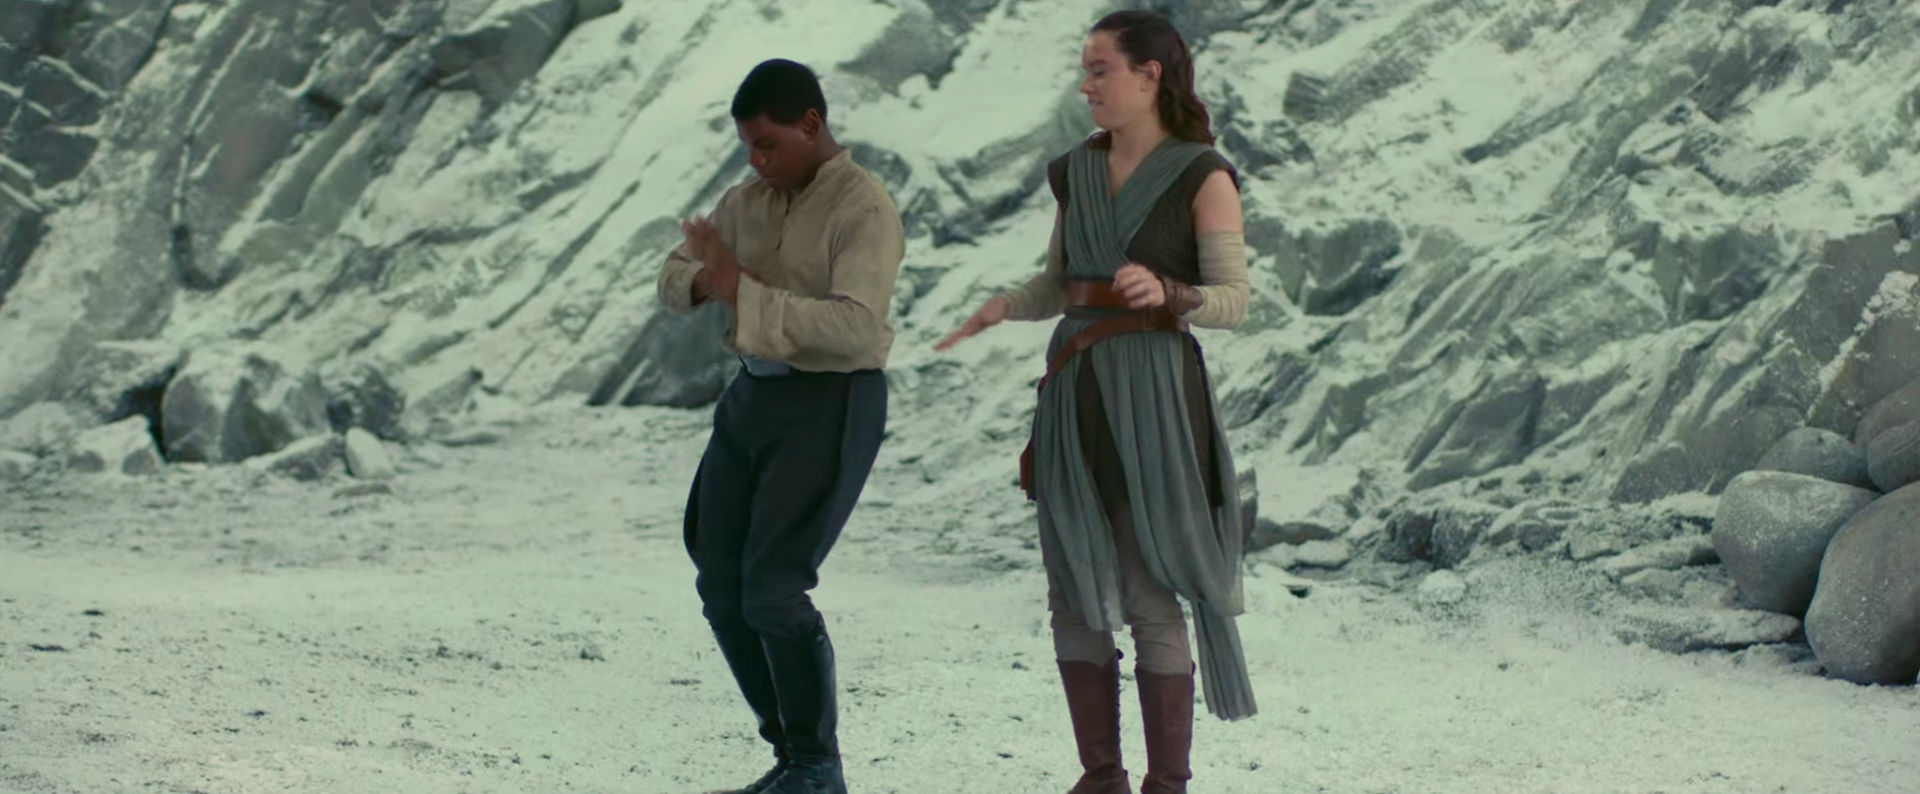 All The Details And Secrets We Spotted In The Latest Star Wars: The Last Jedi Footage